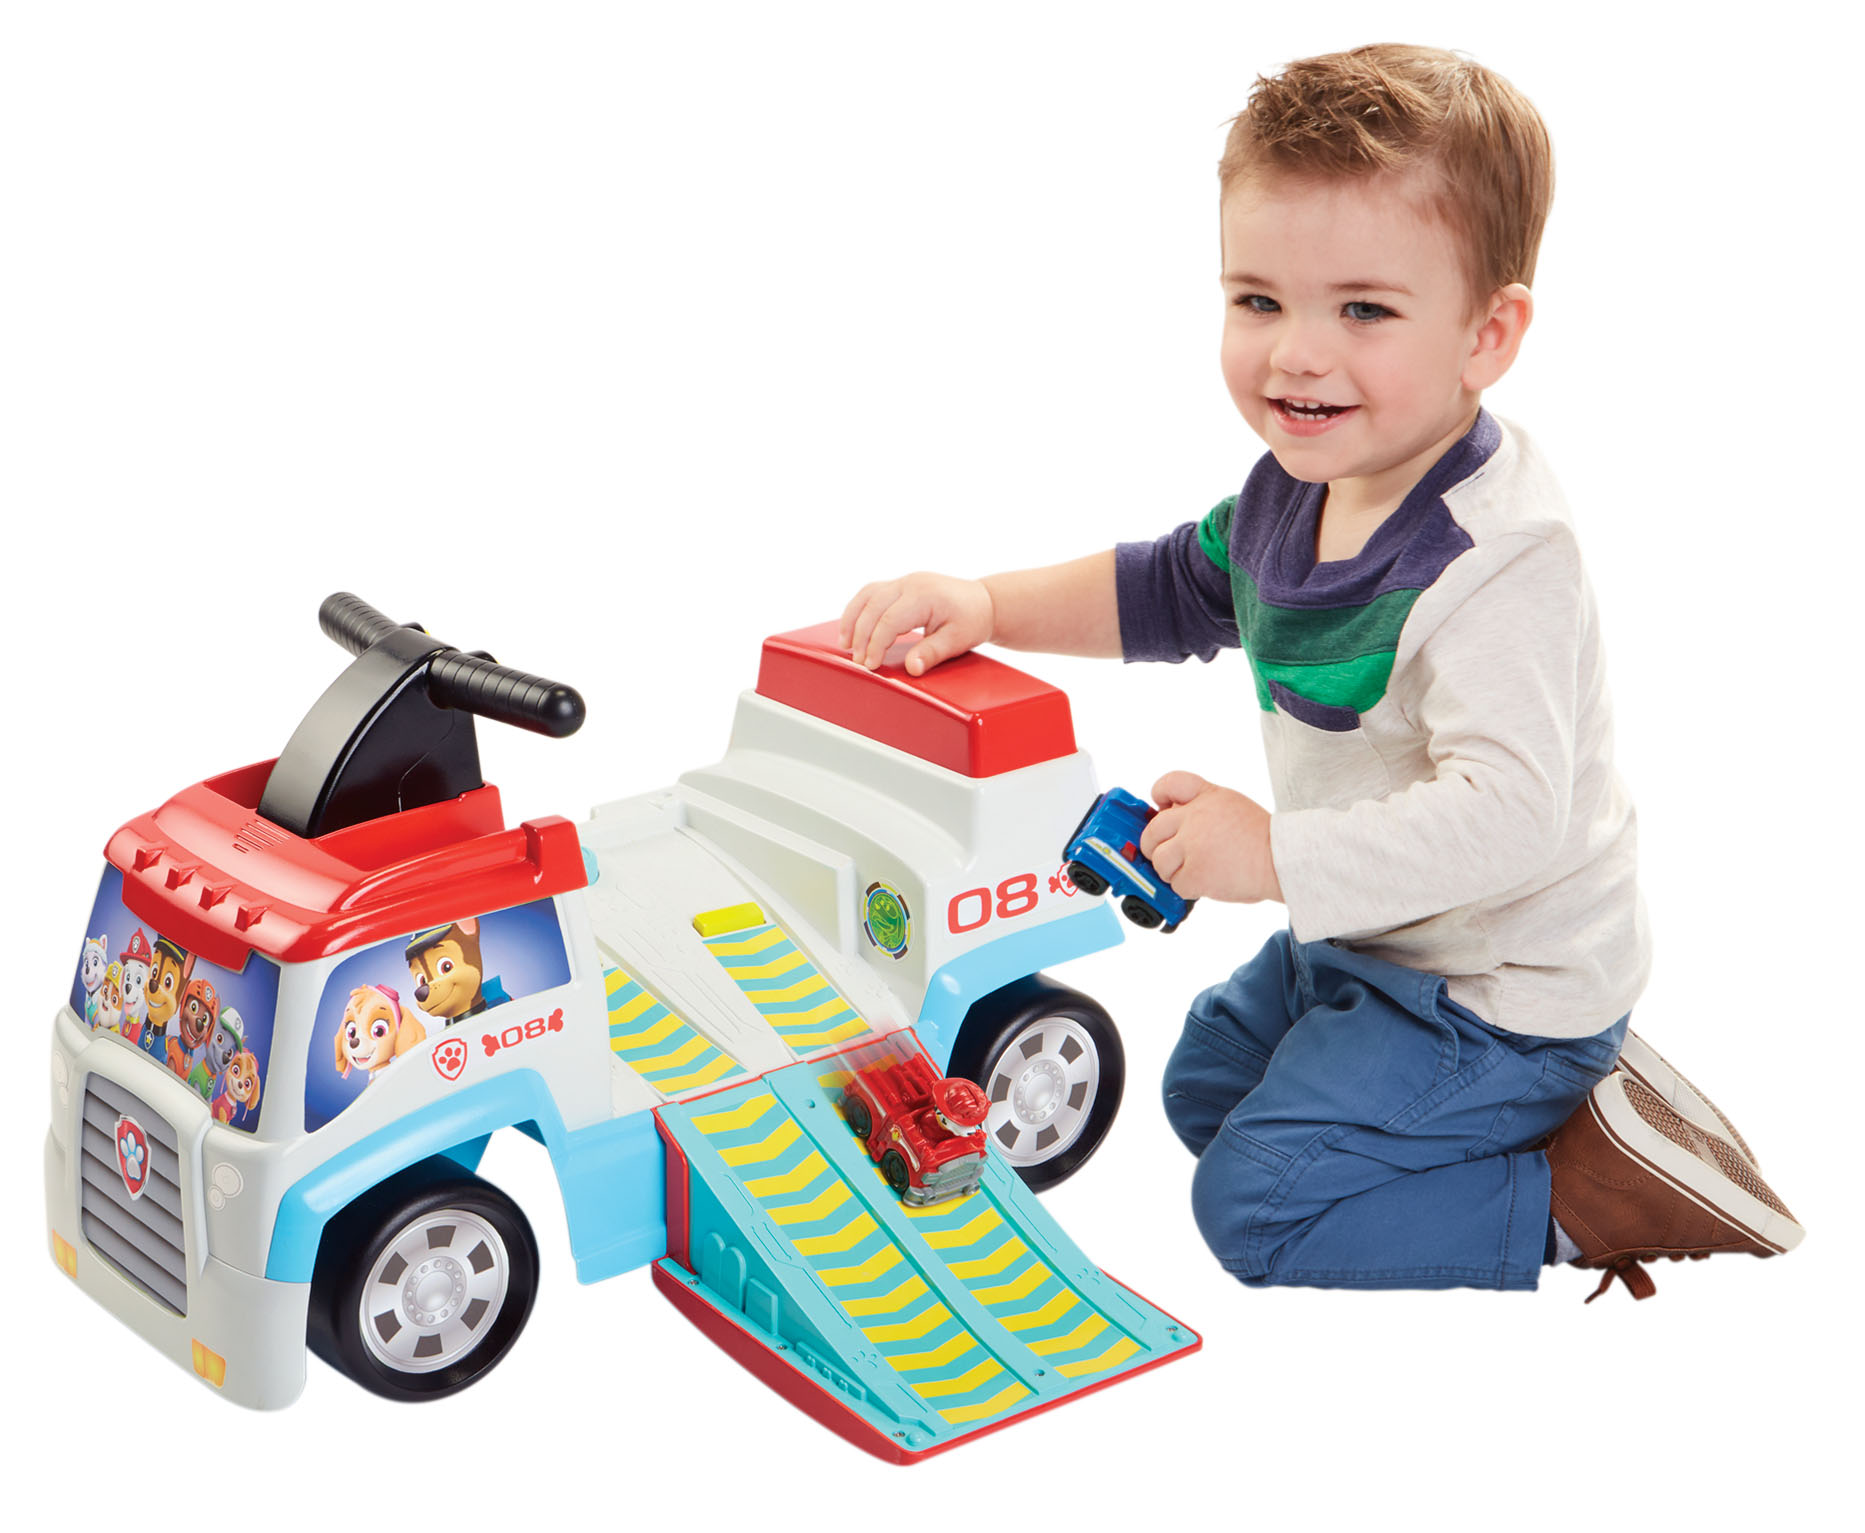 Paw Patrol Patroller Ride-On w/ Chase & Marshall Mini Vehicles $19.10 + Free Shipping w/ Walmart+ or Orders $35+